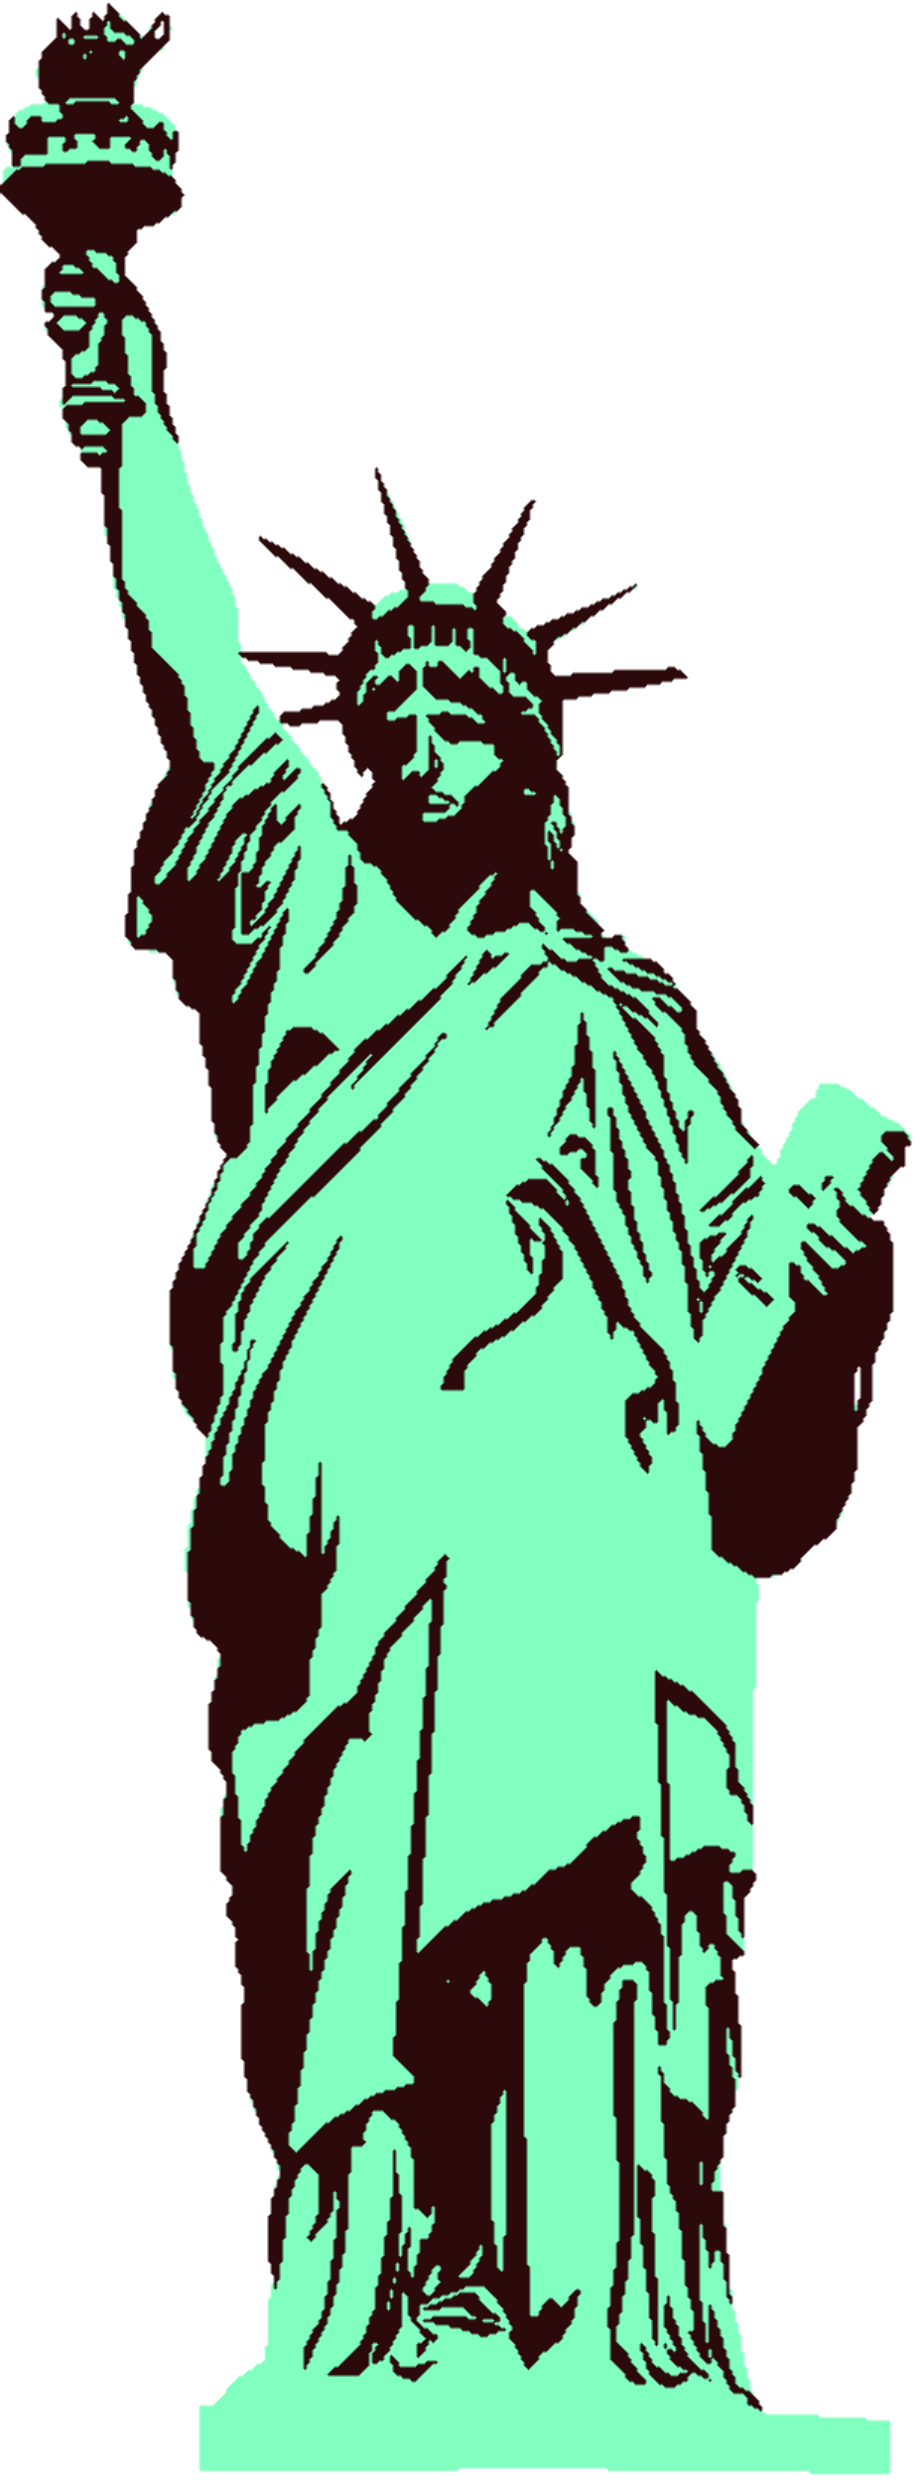 Download High Quality statue of liberty clipart graphic